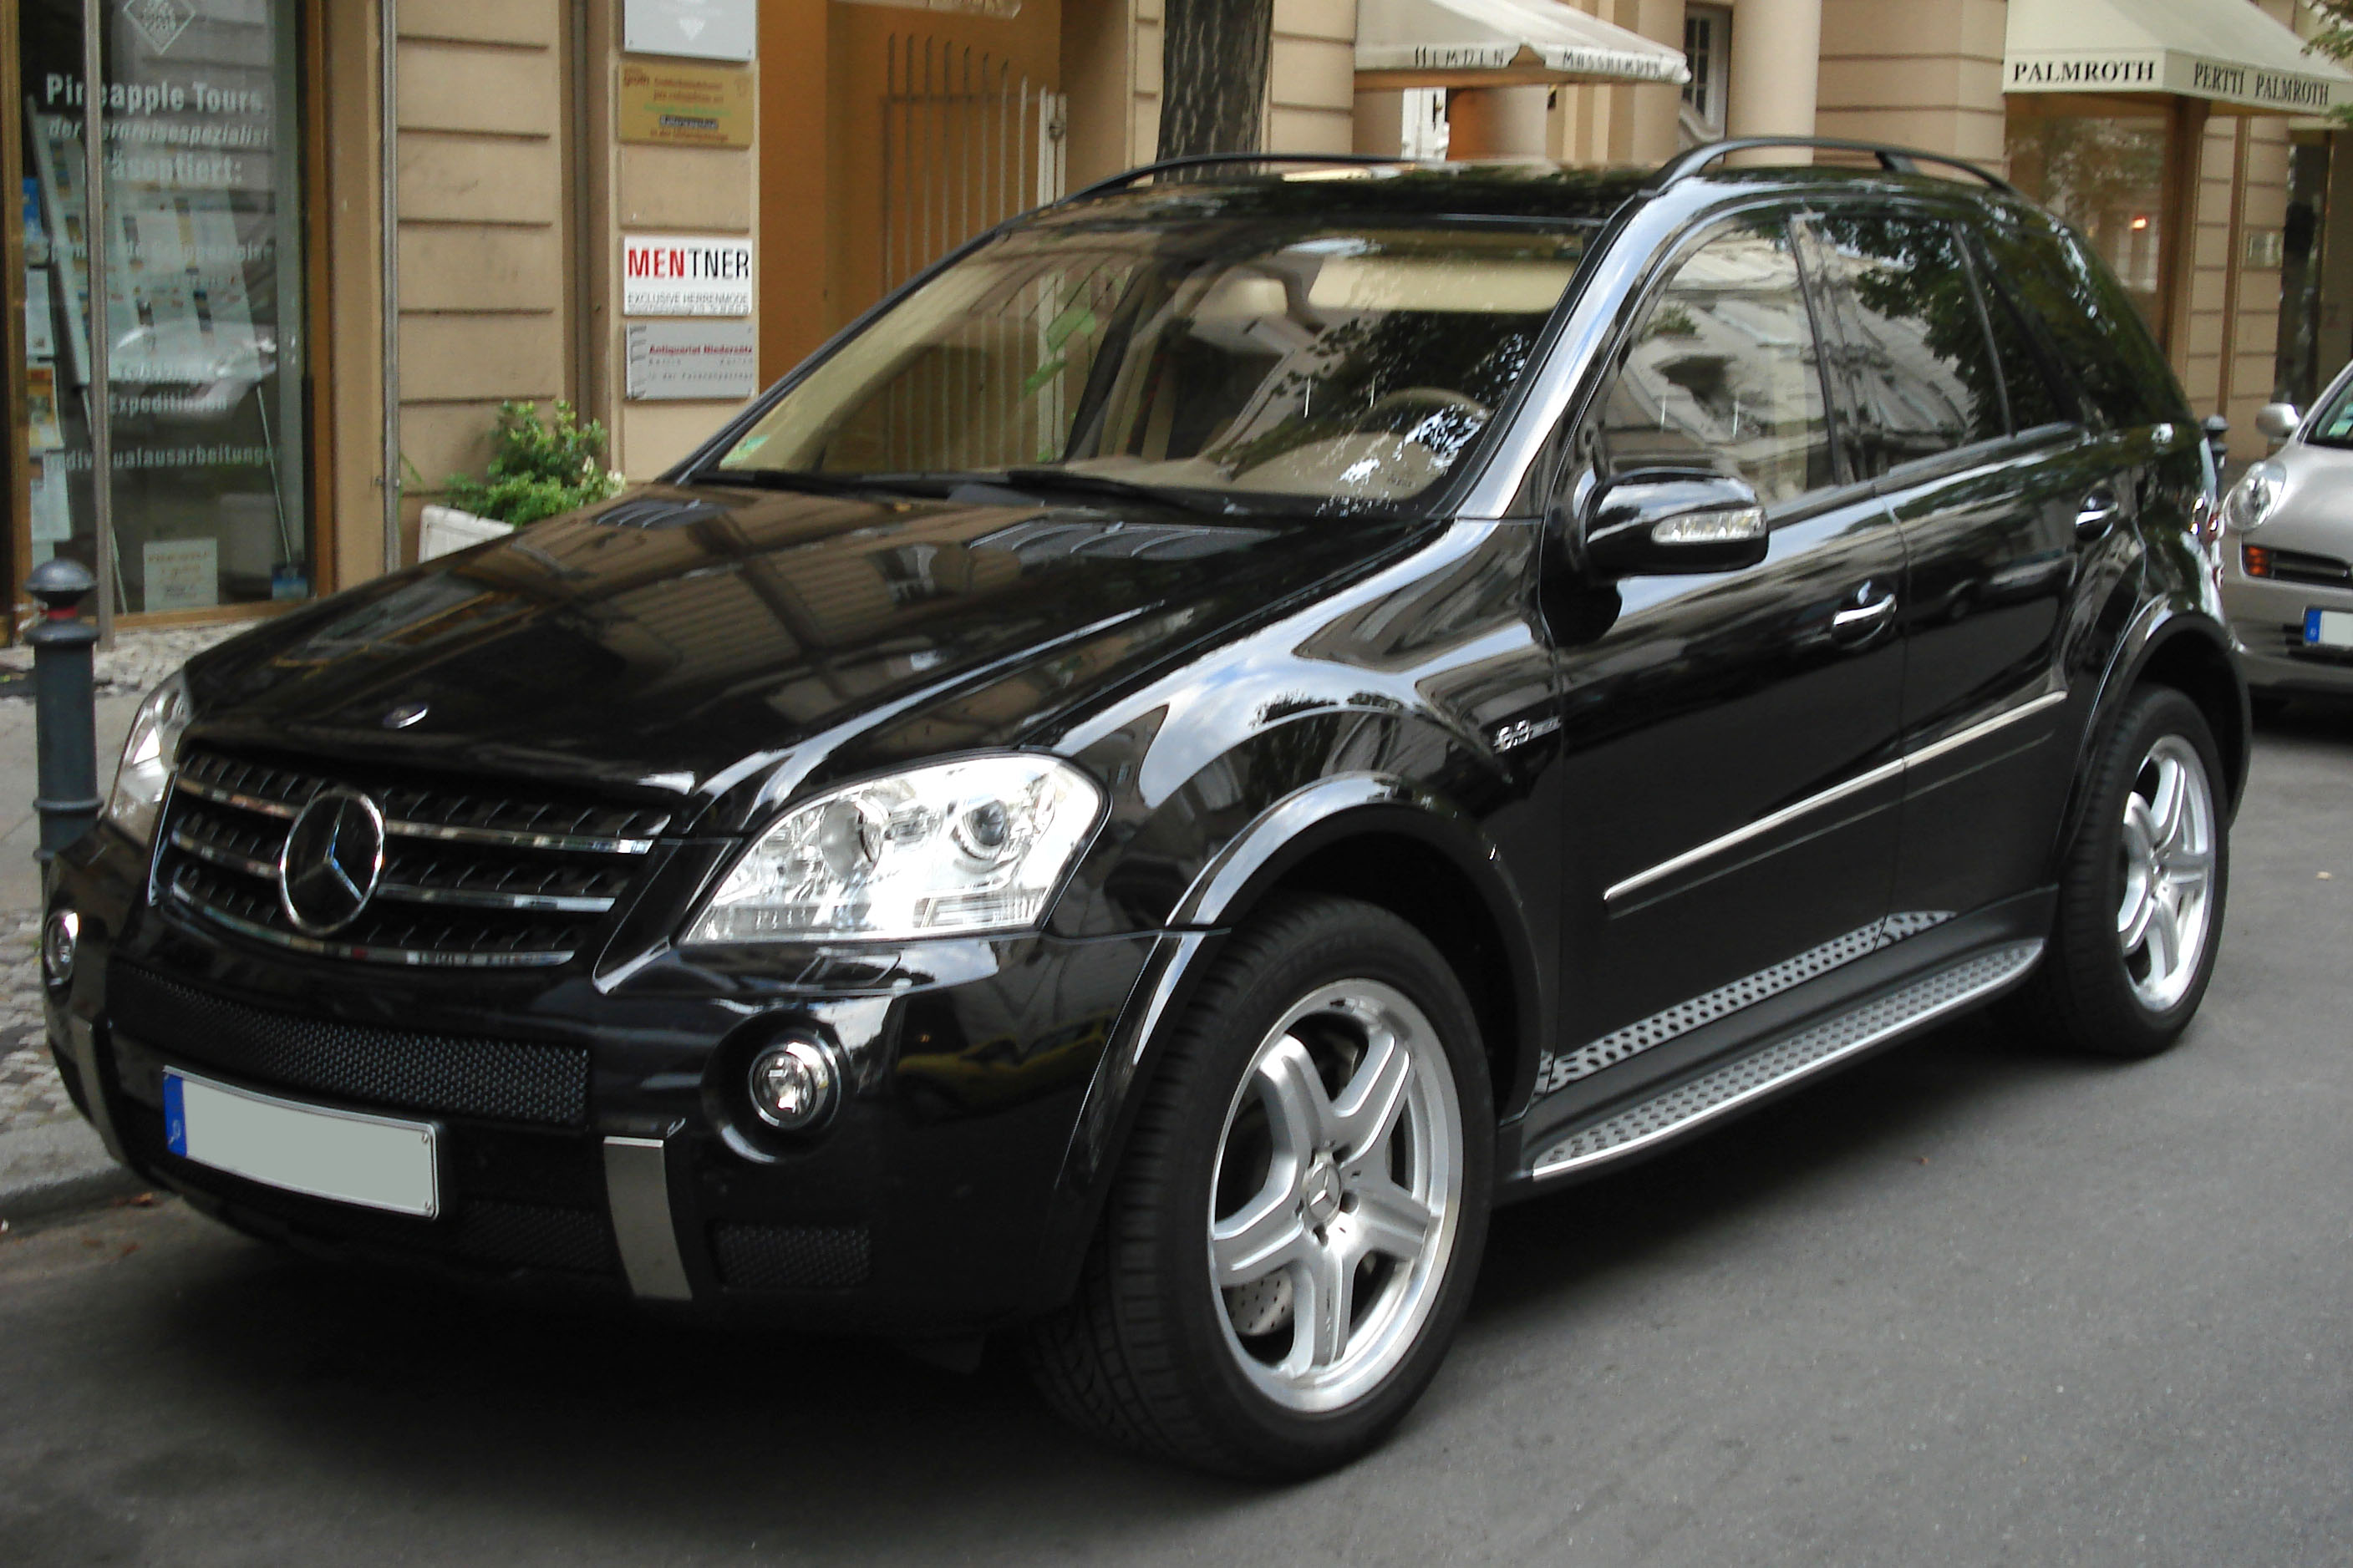 Mercedesbenz ML 2003 Review, Amazing Pictures and Images